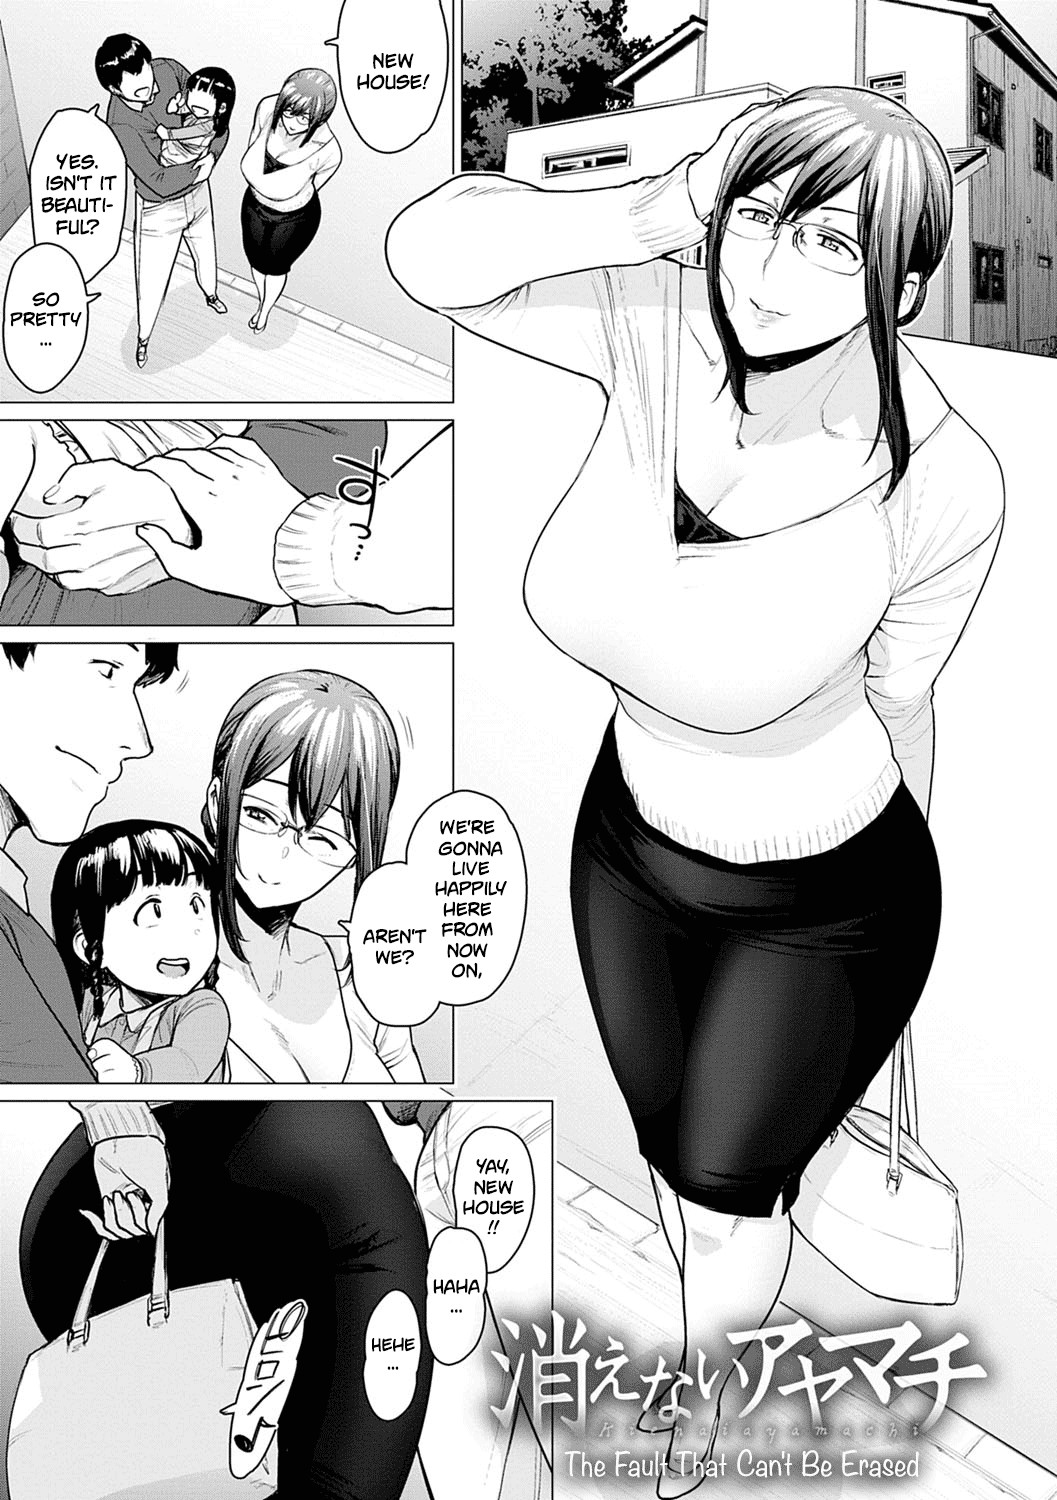 Hentai Manga Comic-The Fault That Can't Be Erased-Read-1